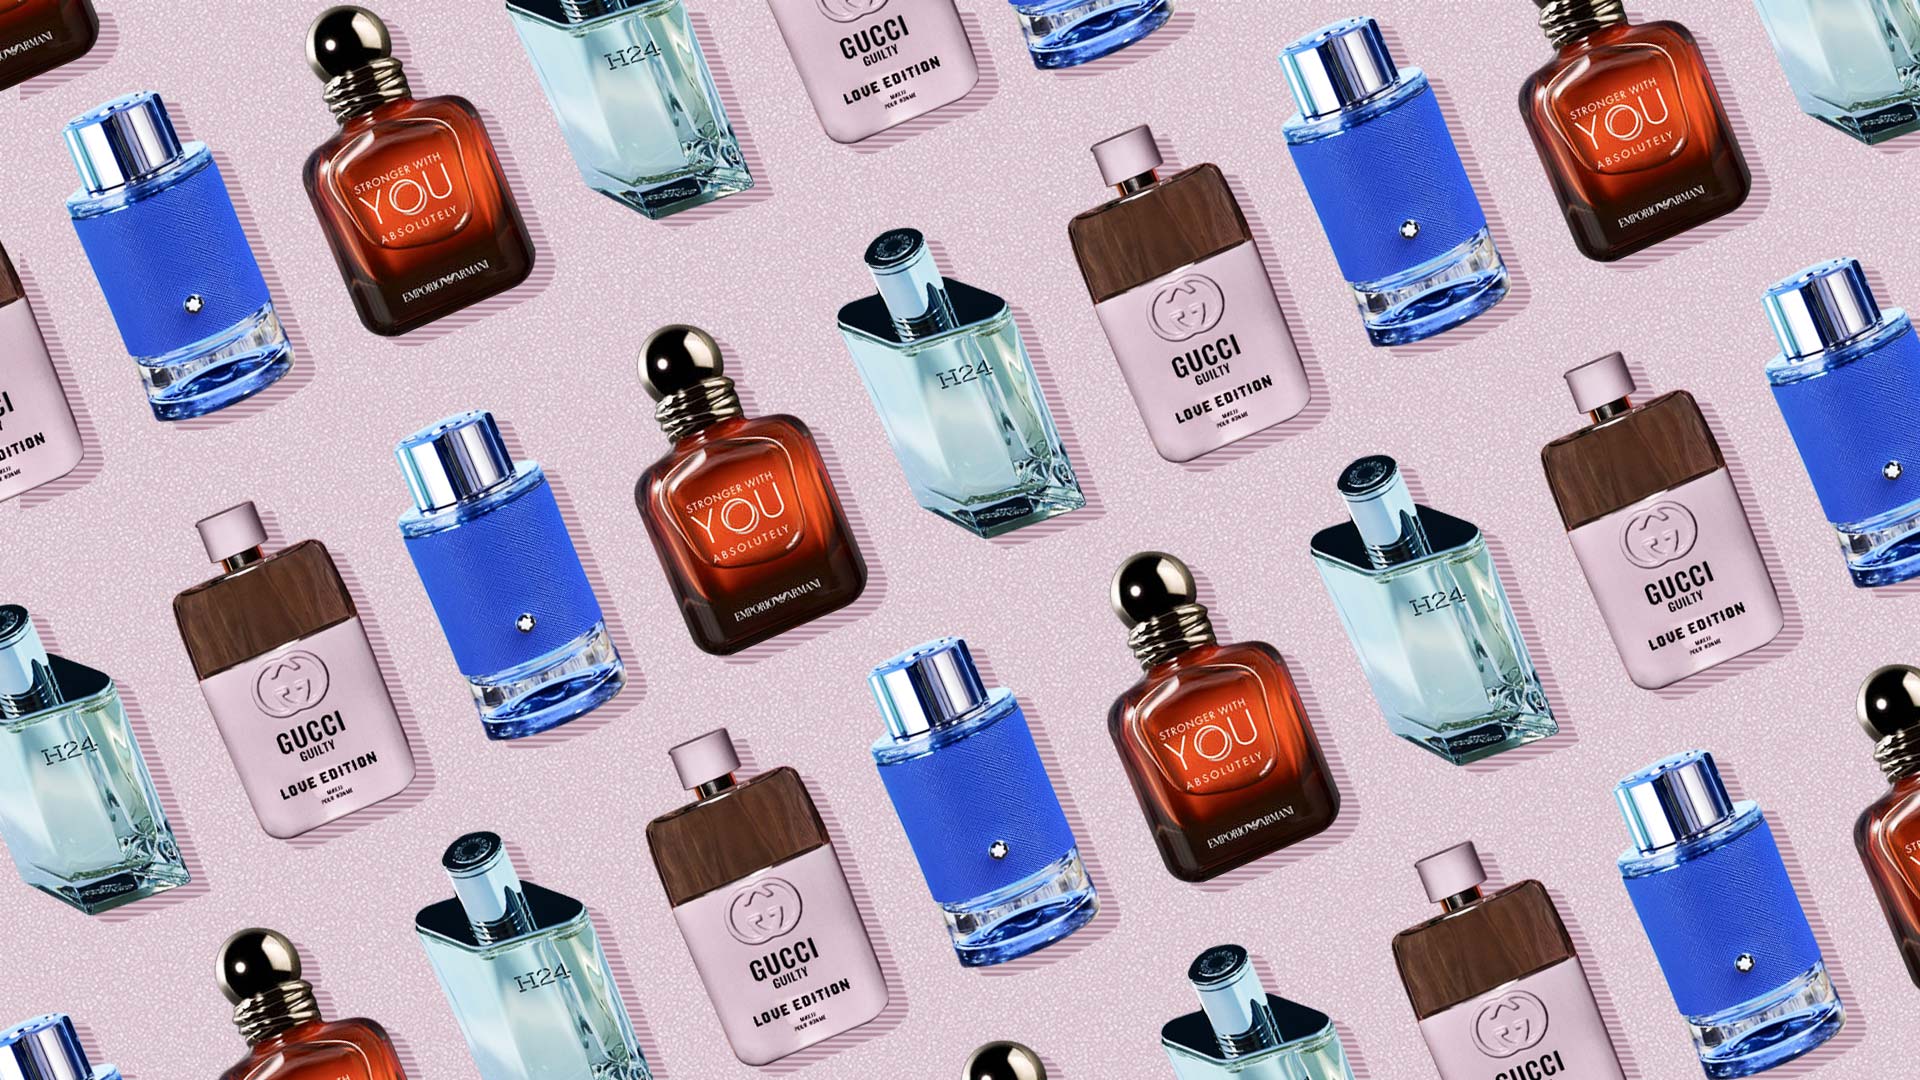 Best perfumes for men in India: 10 fragrances of 2021 (so far) that women will love on a man